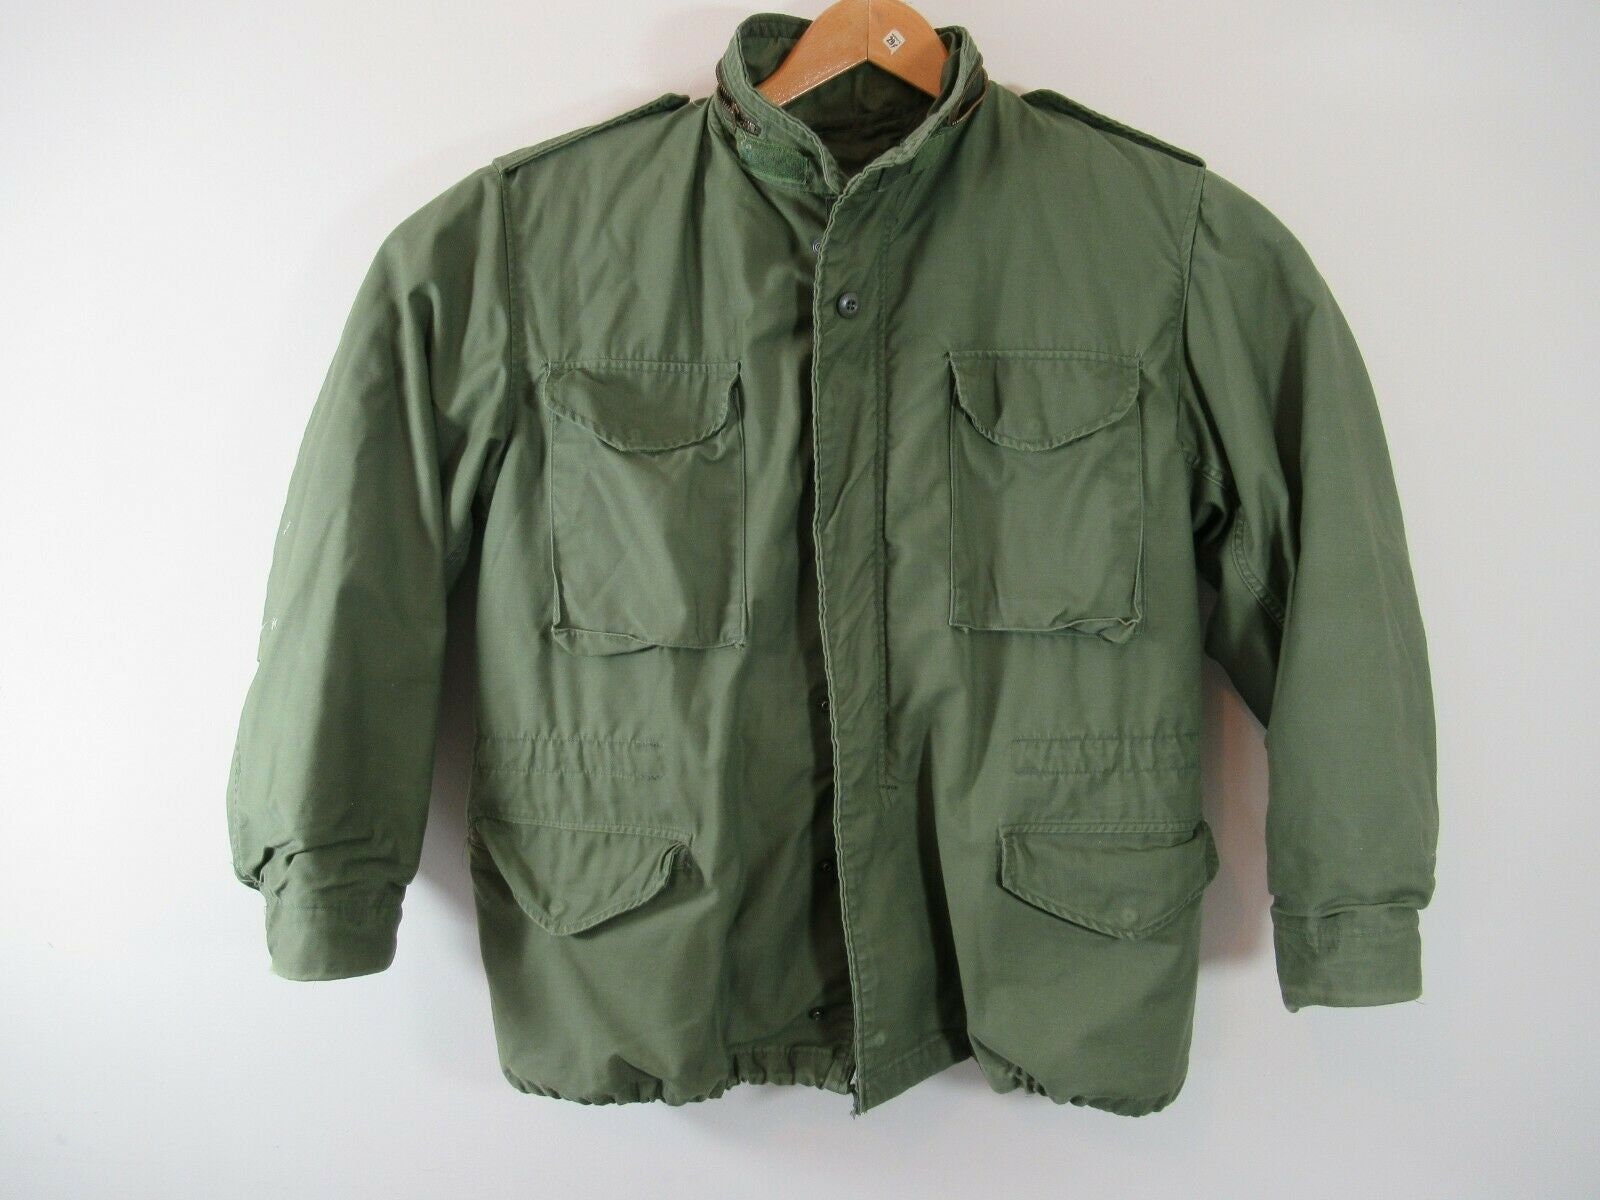 1980s Army Military Cold Weather Field Jacket, Coat, Green, Large ...